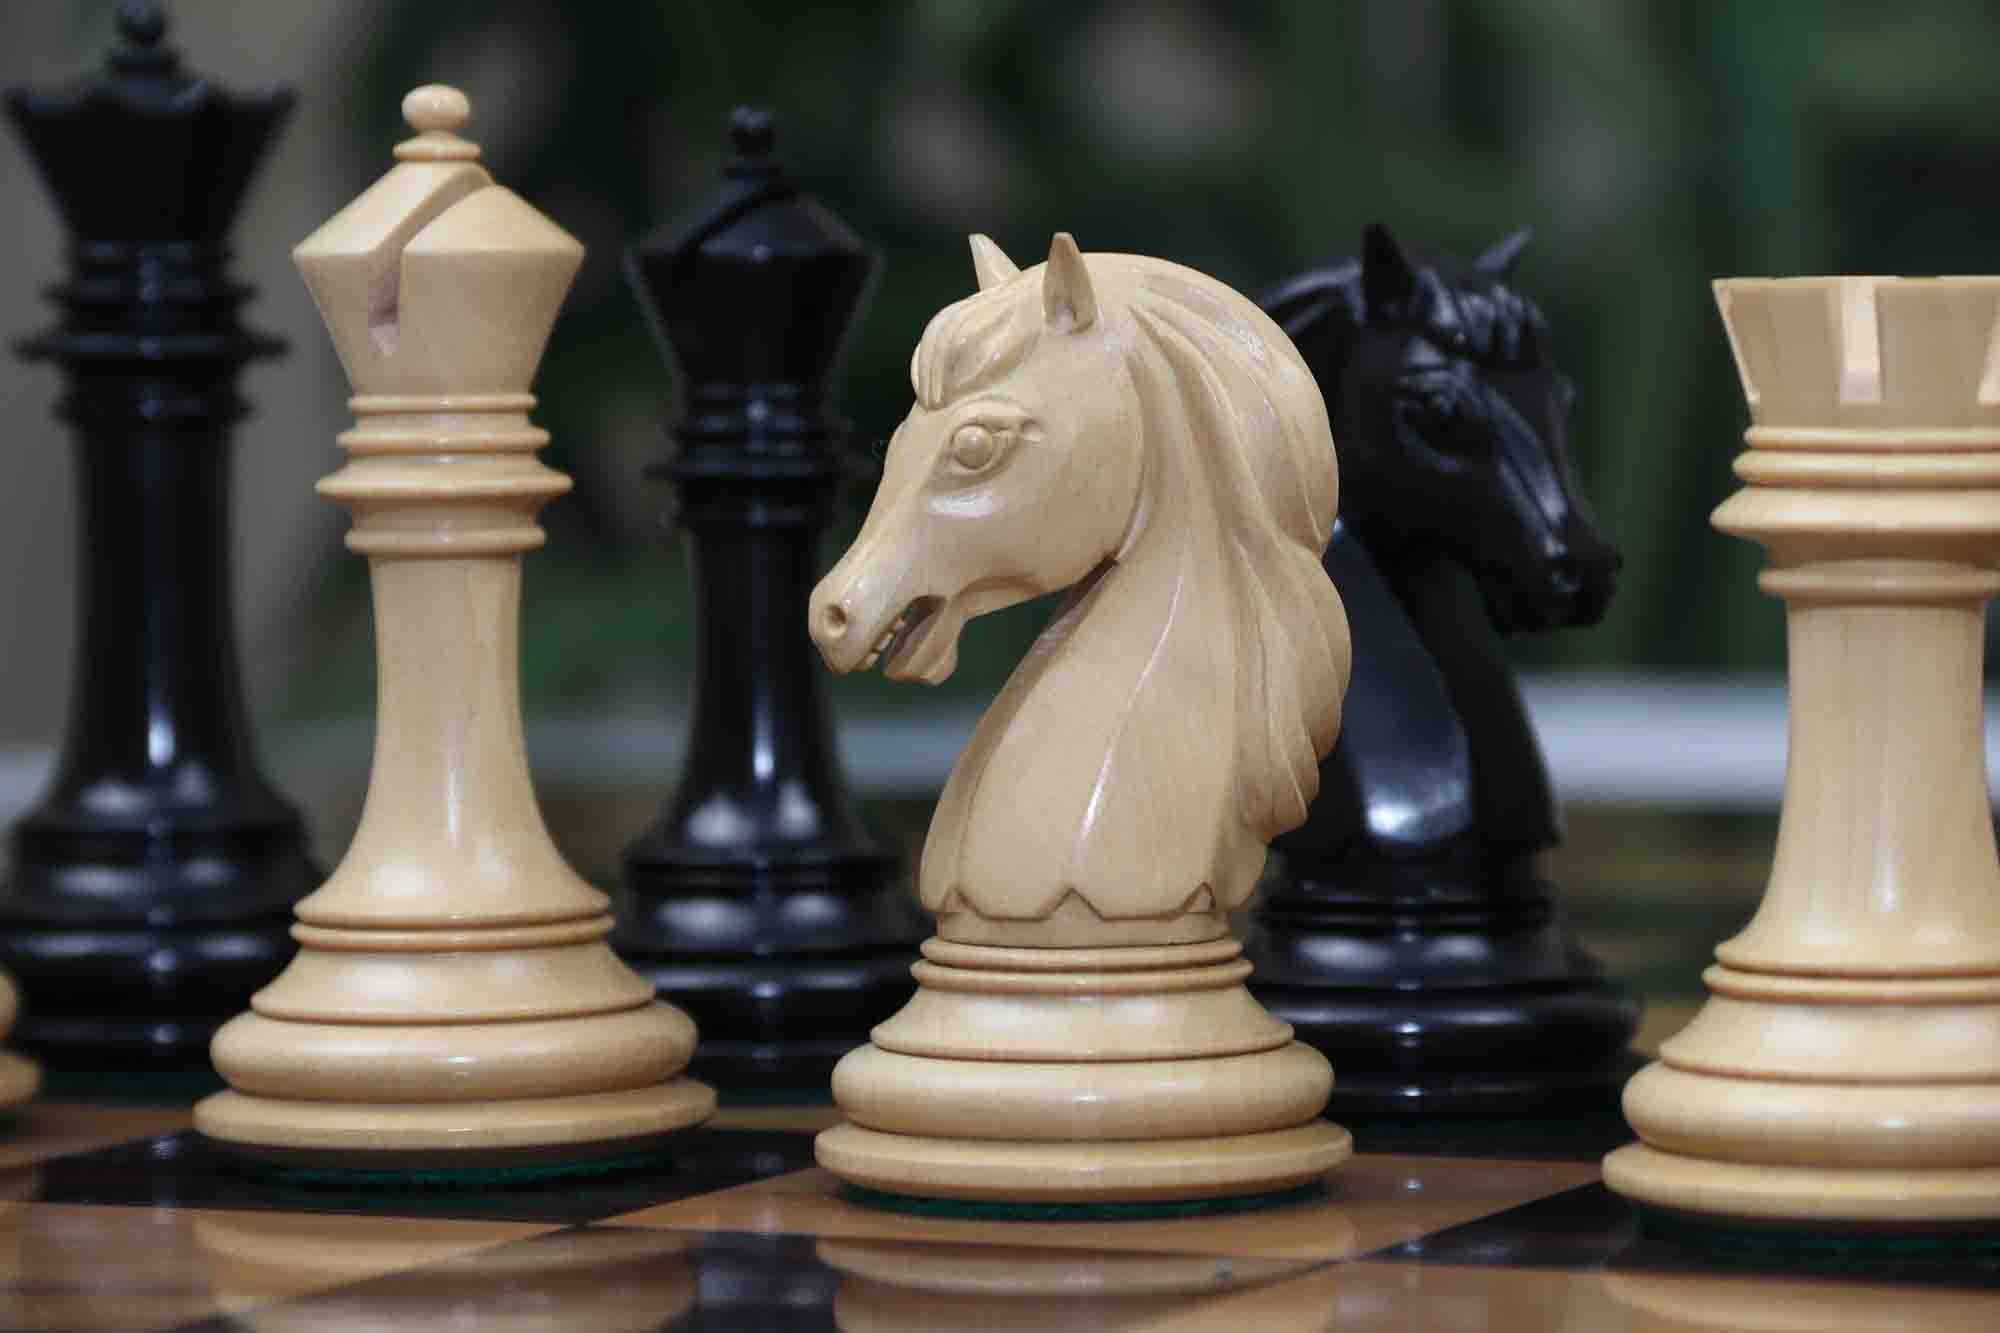 The Cavalry Luxury Chess Set in Ebony & Walnut [RCPB320] - $615.00 -  Regency Chess - Finest Quality Chess Sets, Boards & Pieces